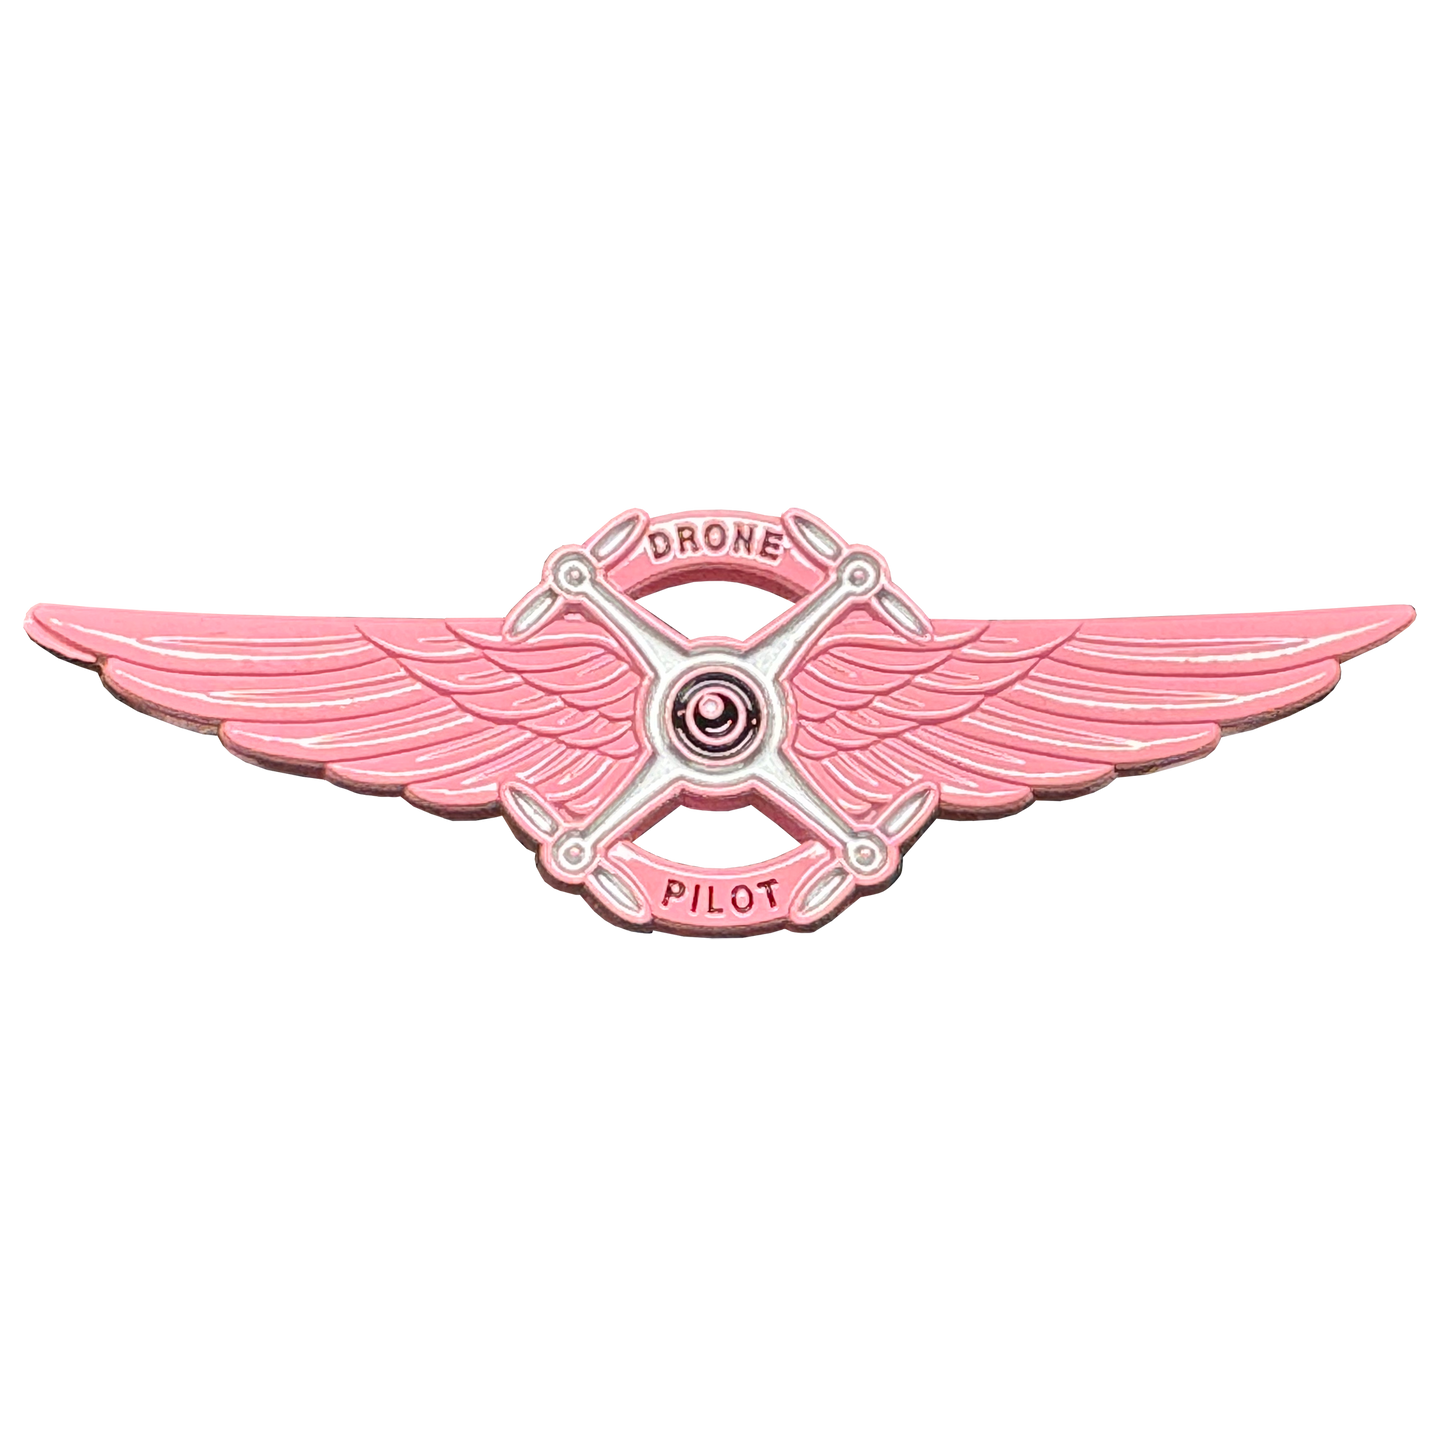 CL2-011 Full size Ladies Pink UAS FAA Commercial Drone Pilot Wings pin Breast Cancer Awareness